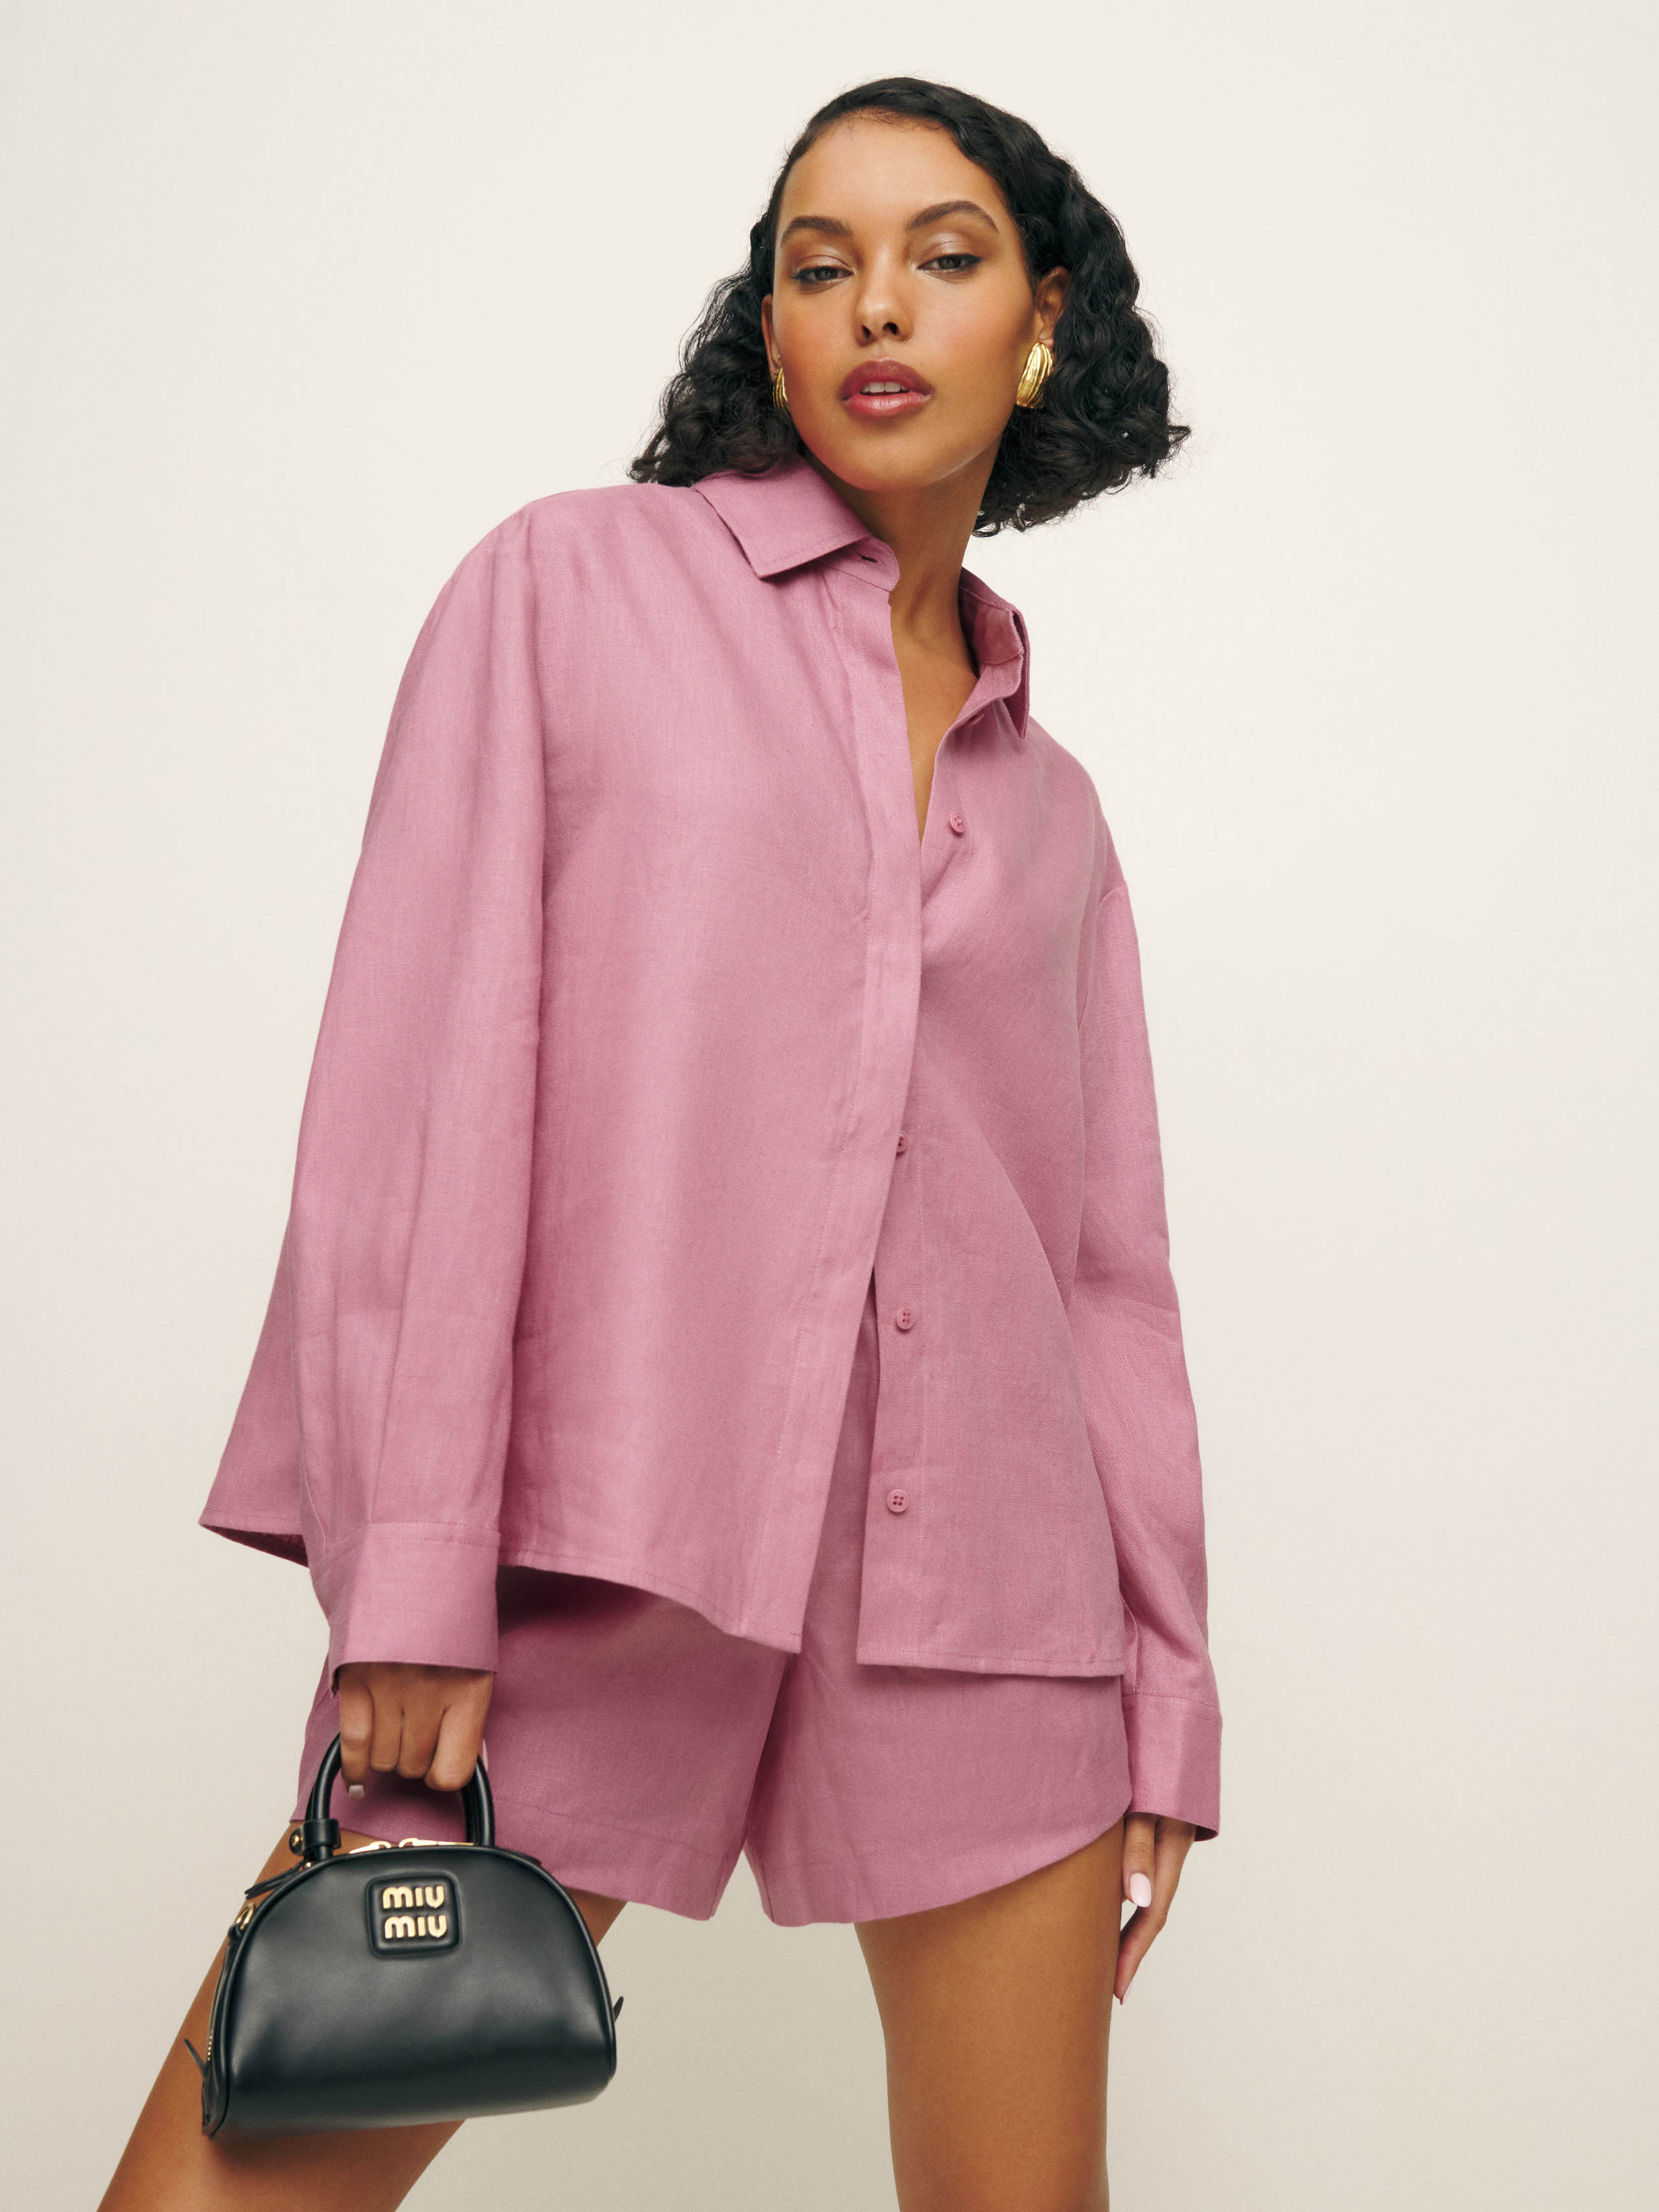 Reformation Andy Oversized Linen Shirt In Rose Petals